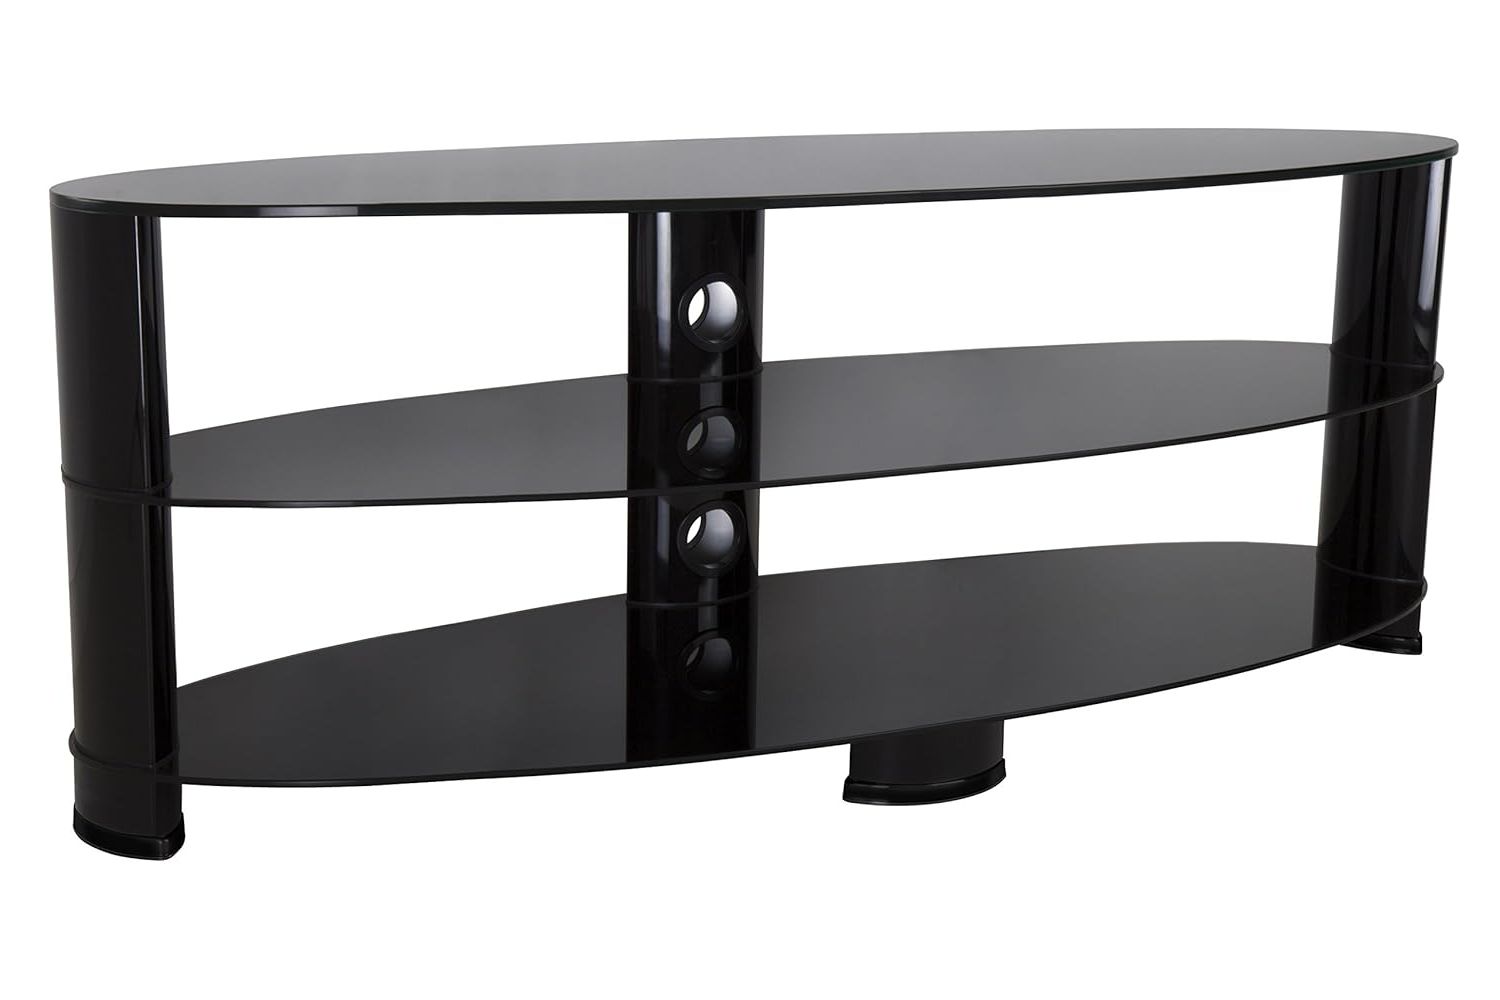 Avf Ovl1400bb A Tv Stand With Glass Shelves For Tvs Up To 65 Inch Regarding Well Liked Glass Shelves Tv Stands (View 10 of 15)